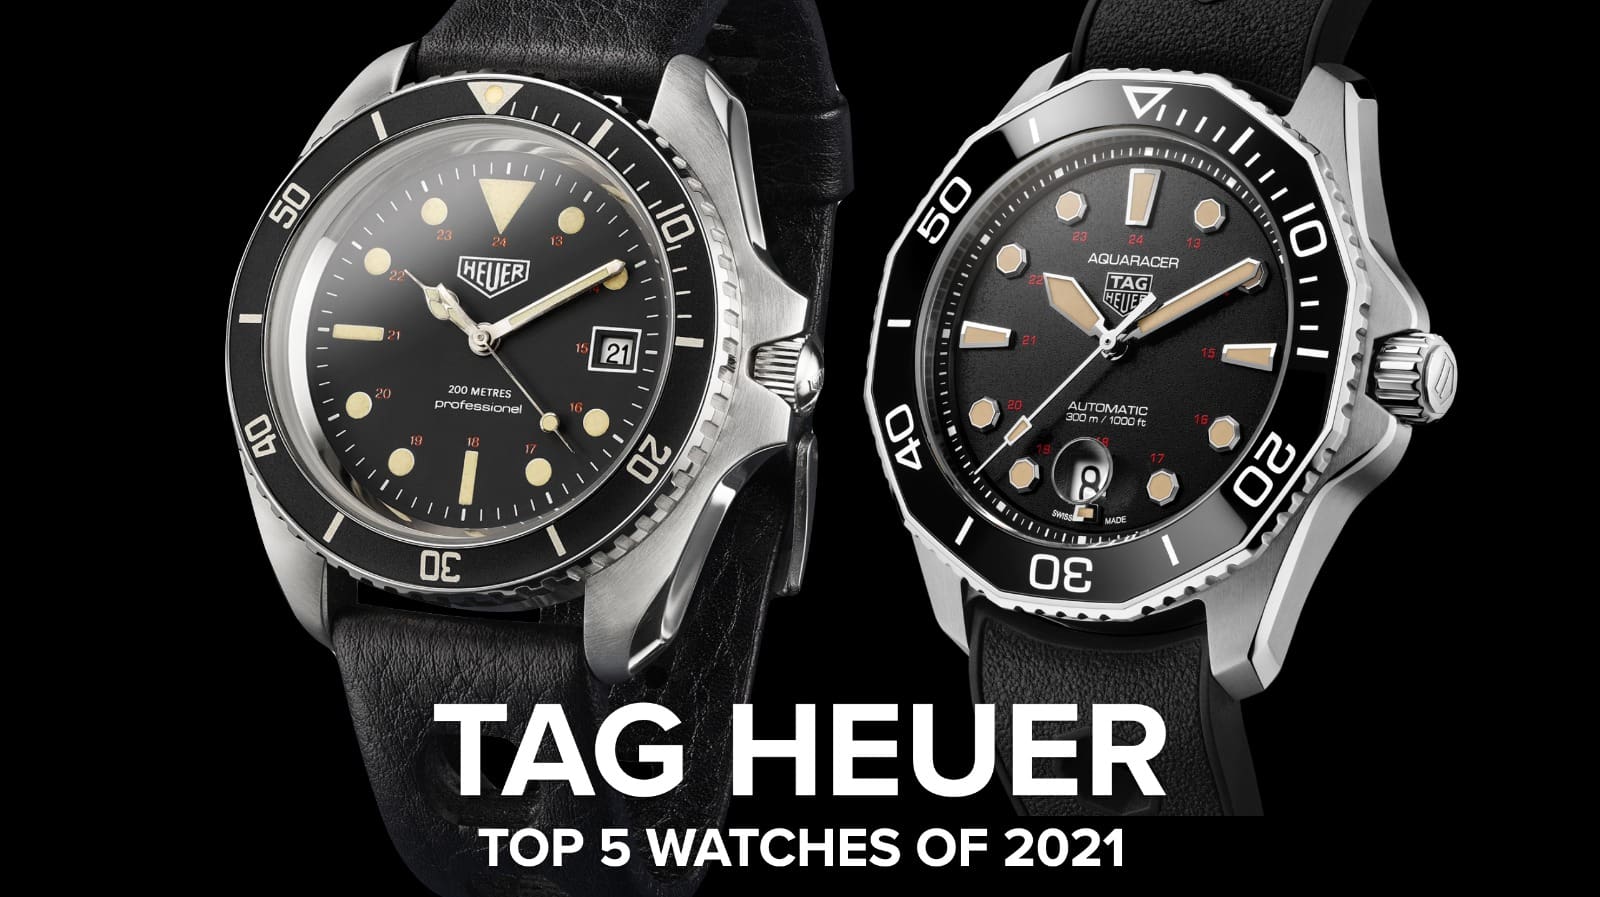 The top 5 TAG Heuer watches of 2021, with a focus on the redesigned and more refined Aquaracer